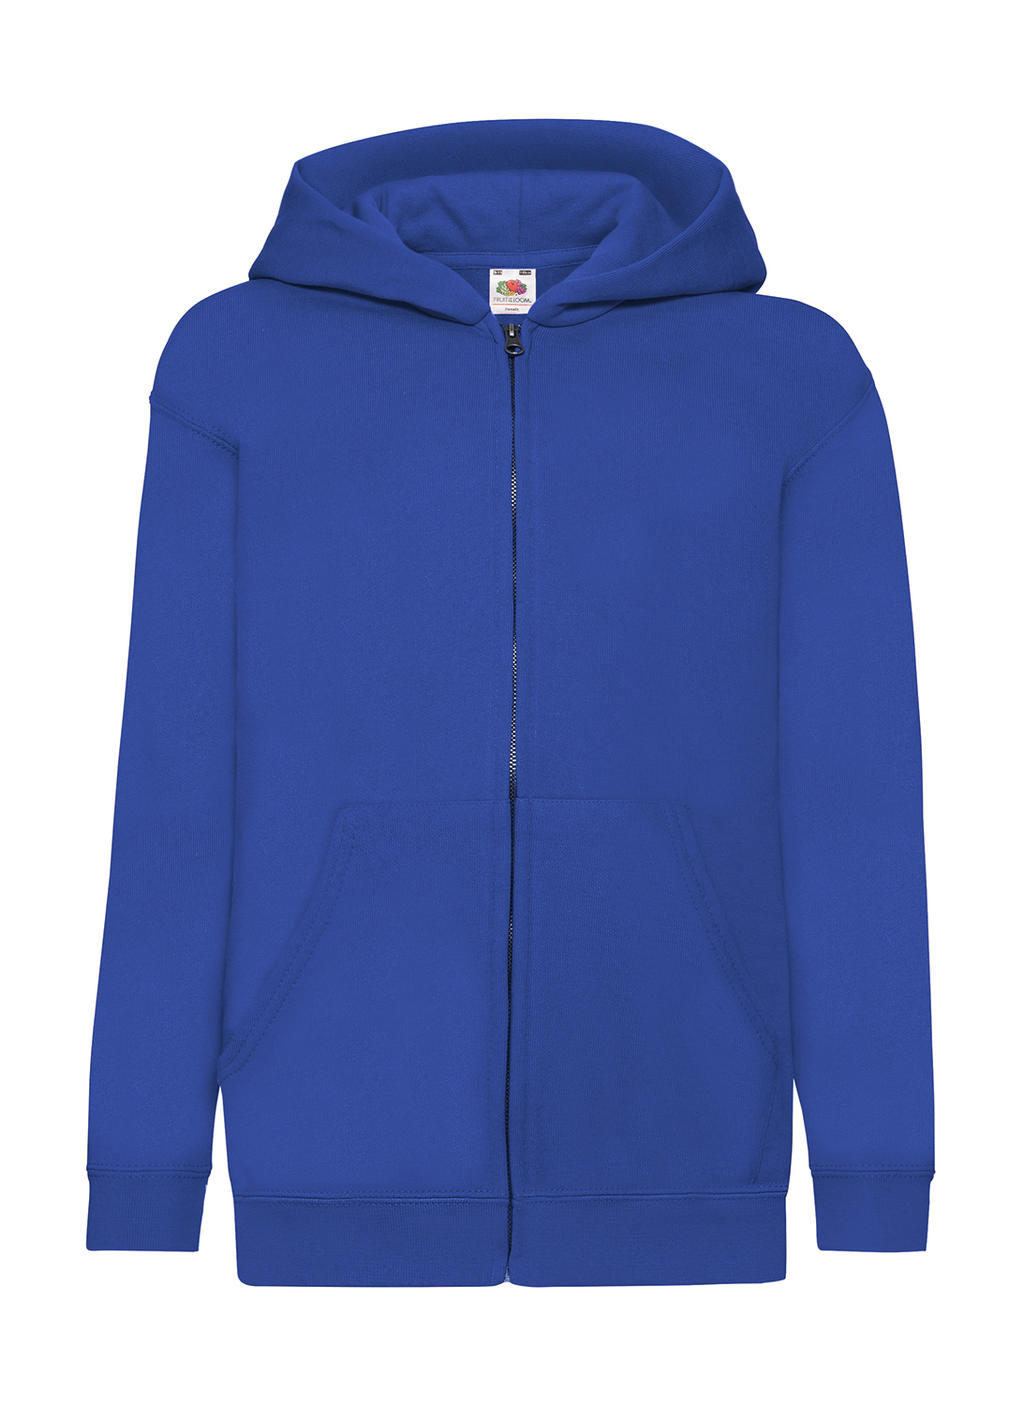  Kids Classic Hooded Sweat Jacket in Farbe Royal Blue